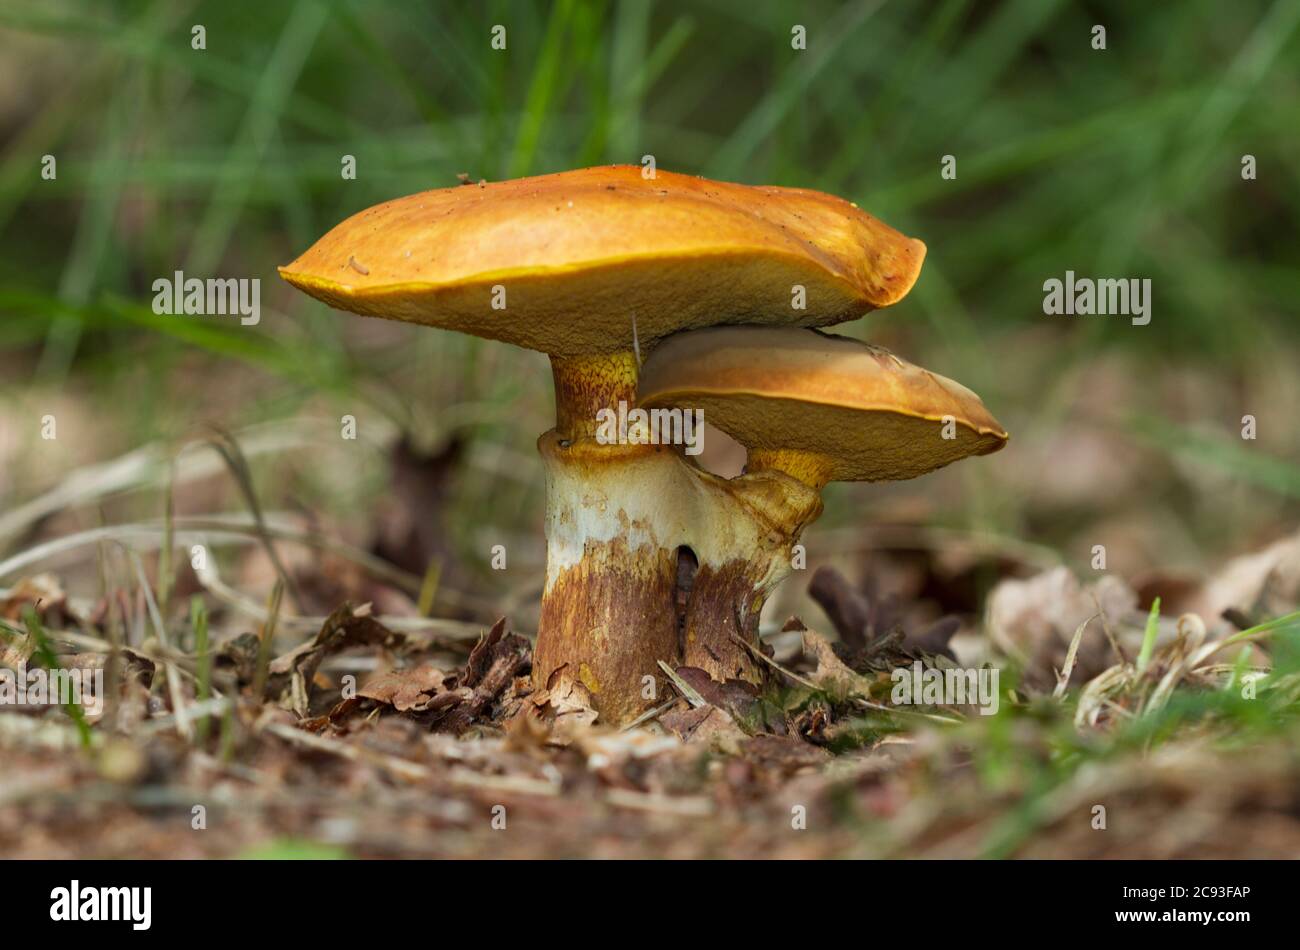 Close-up of two intertwined mushrooms, Greville’s boletes Stock Photo